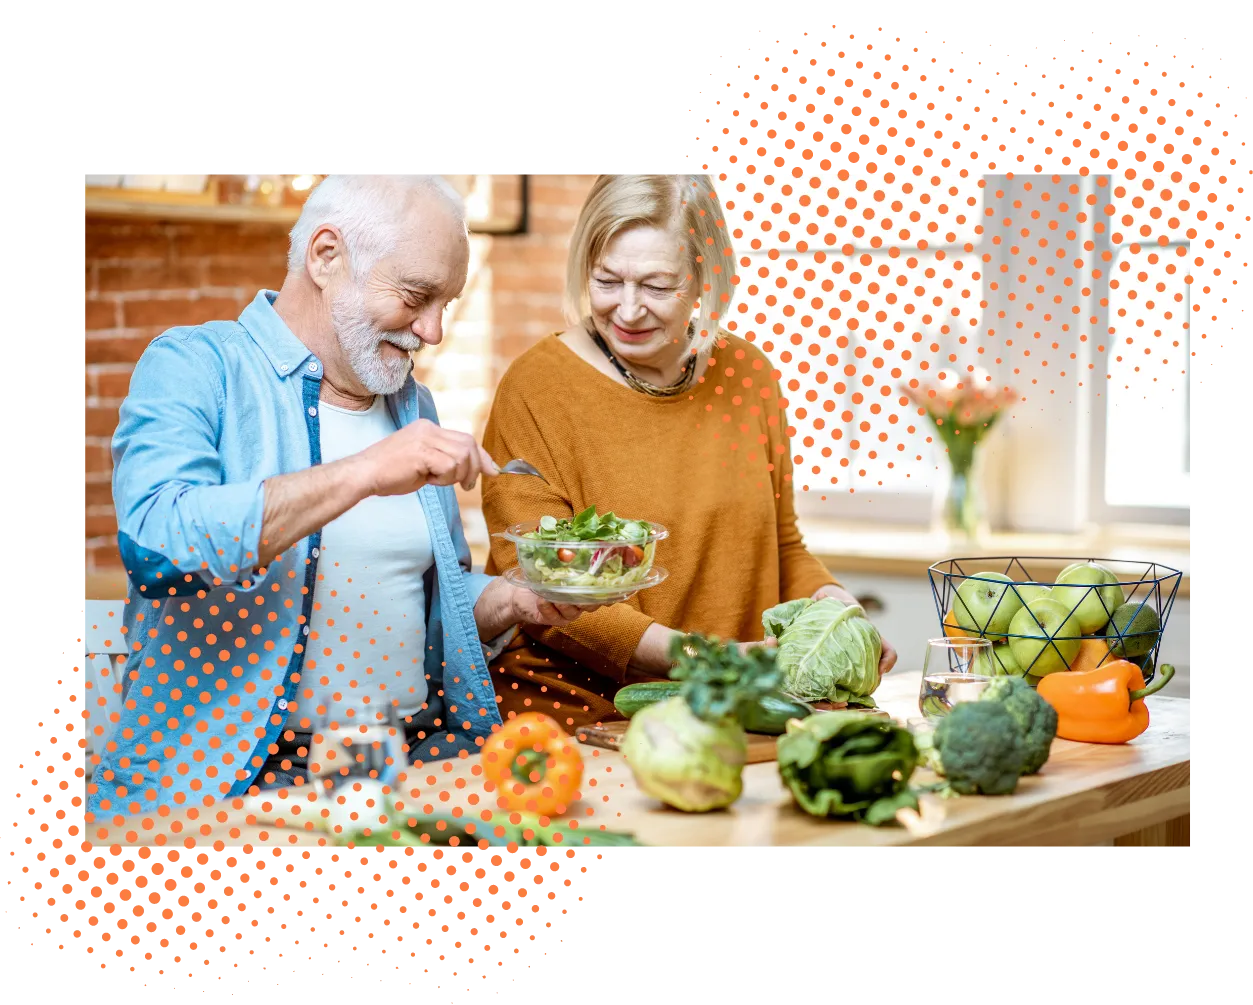 Man and woman in their golden years cooking a healthy meal together